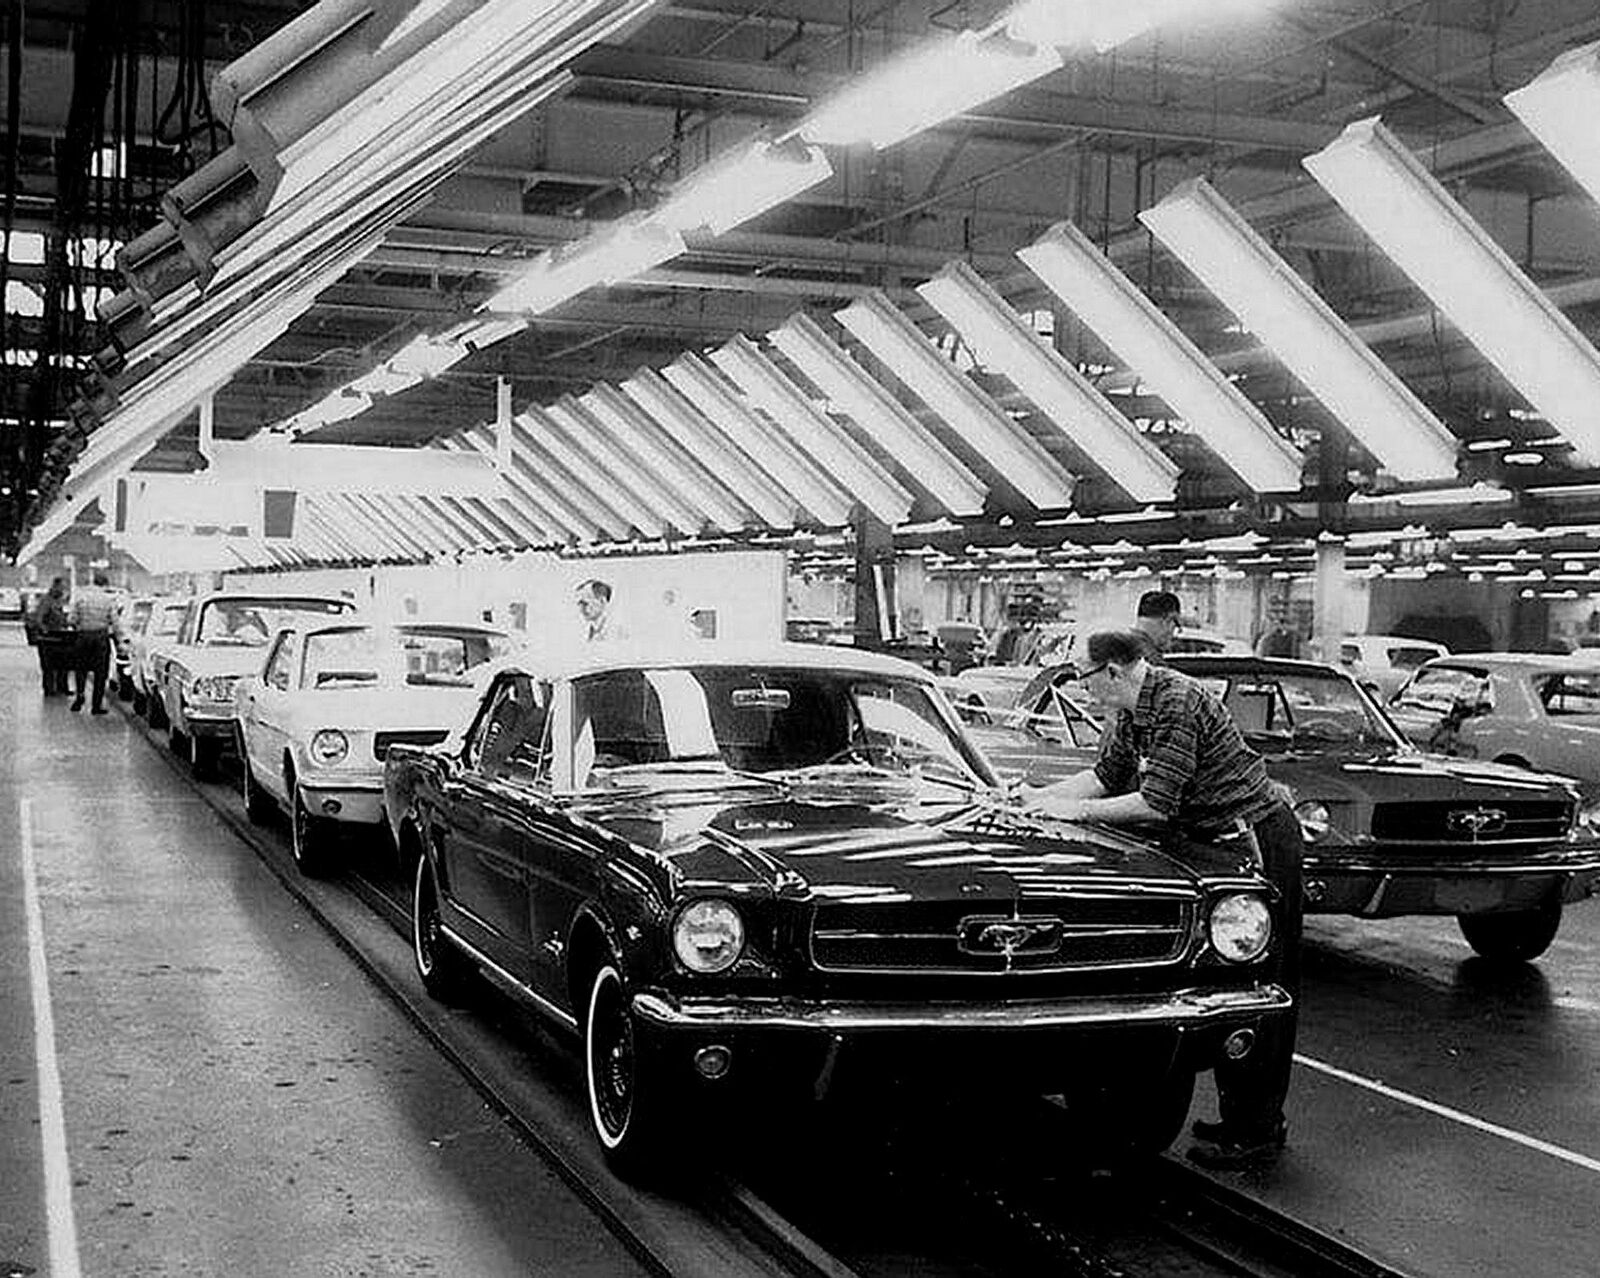 1966 FORD MUSTANG ASSEMBLY LINE PHOTO  (206-G)